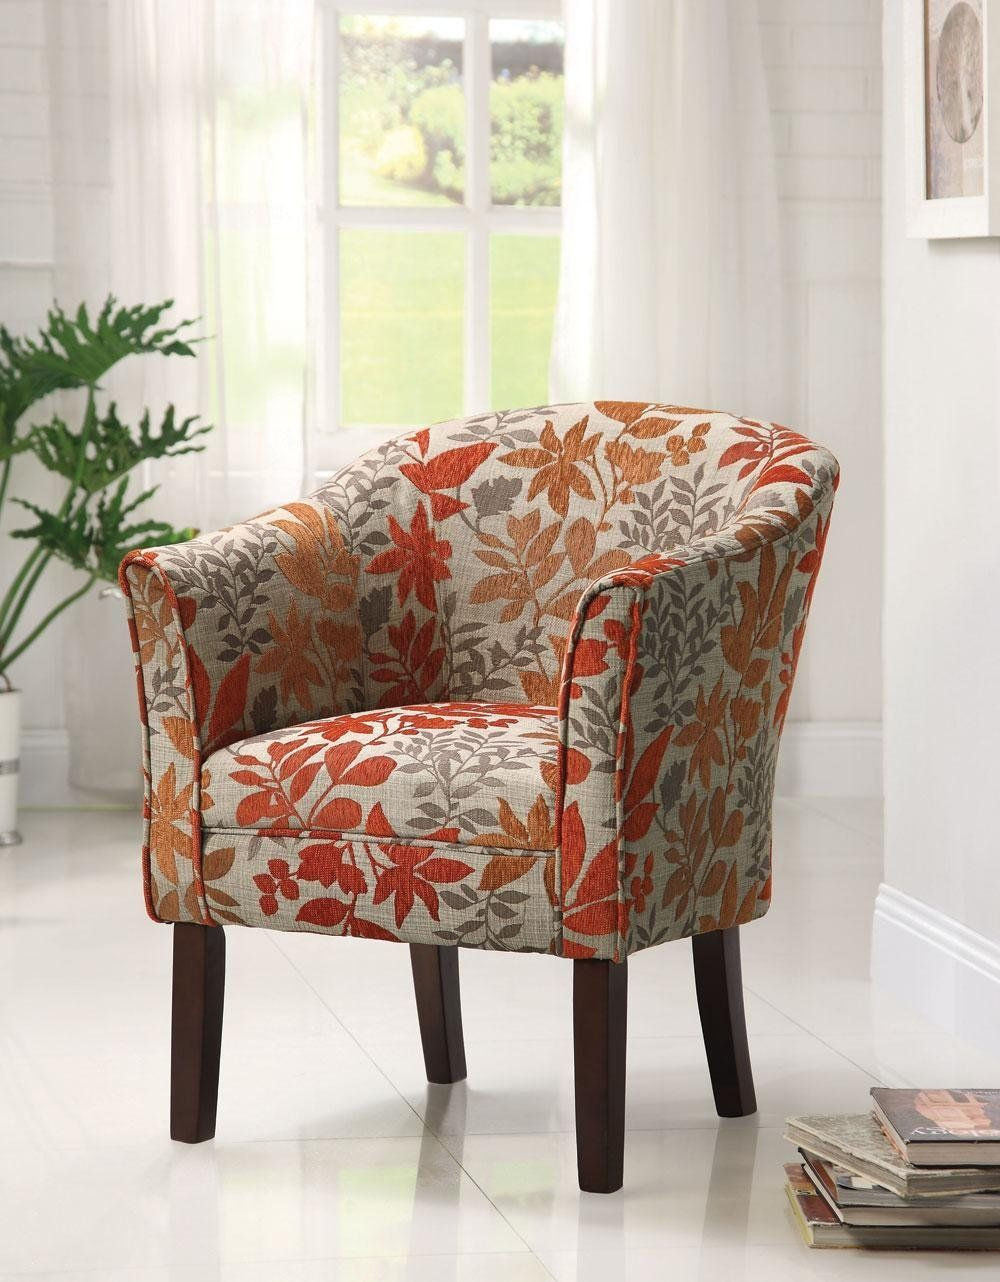 Floral Living Room Chairs
 Amazon COASTER Floral Barrel Back Accent